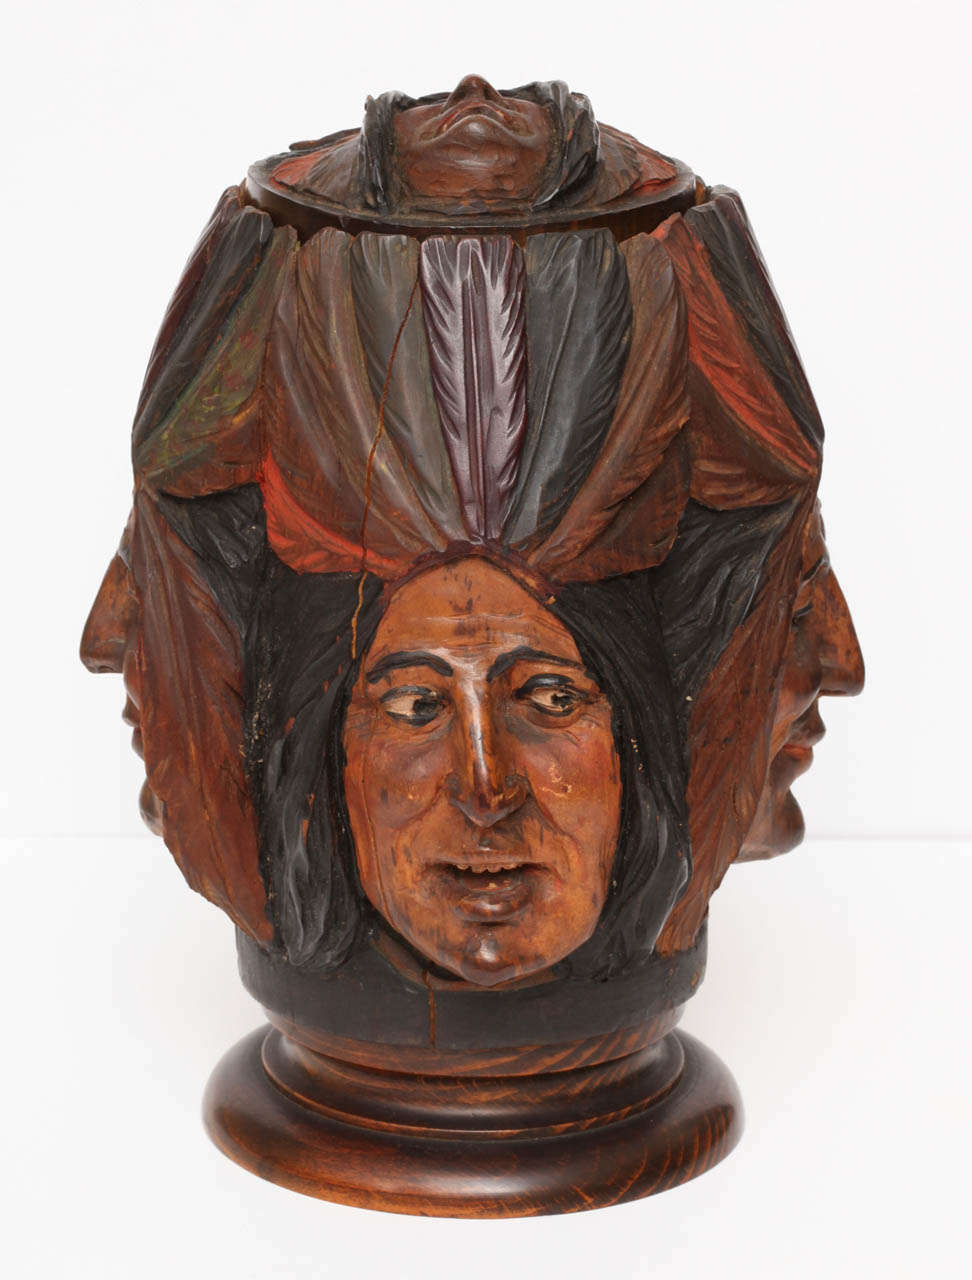 Various hand-carved Indian Chief faces adorn the sides of this tobacco jar. Very detailed with interesting facial expressions and each wearing a colorful feather headdress. Fitted with a lidded top which also has an Indian face carved onto the